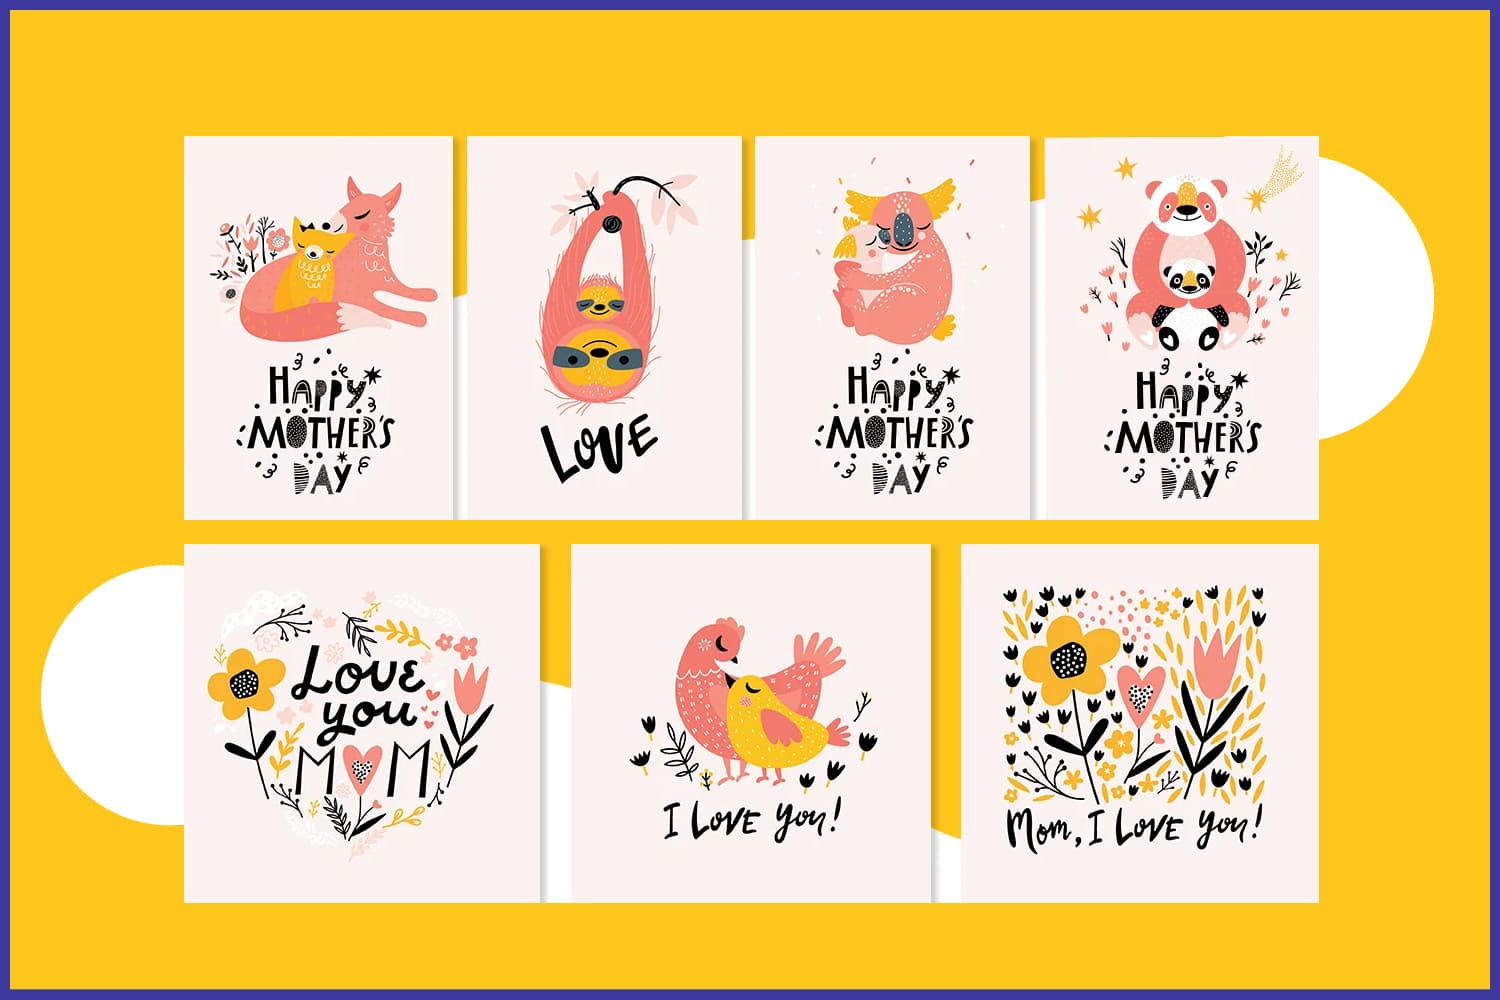 Collage of cards with cute animals, birds and flowers for mother's day.